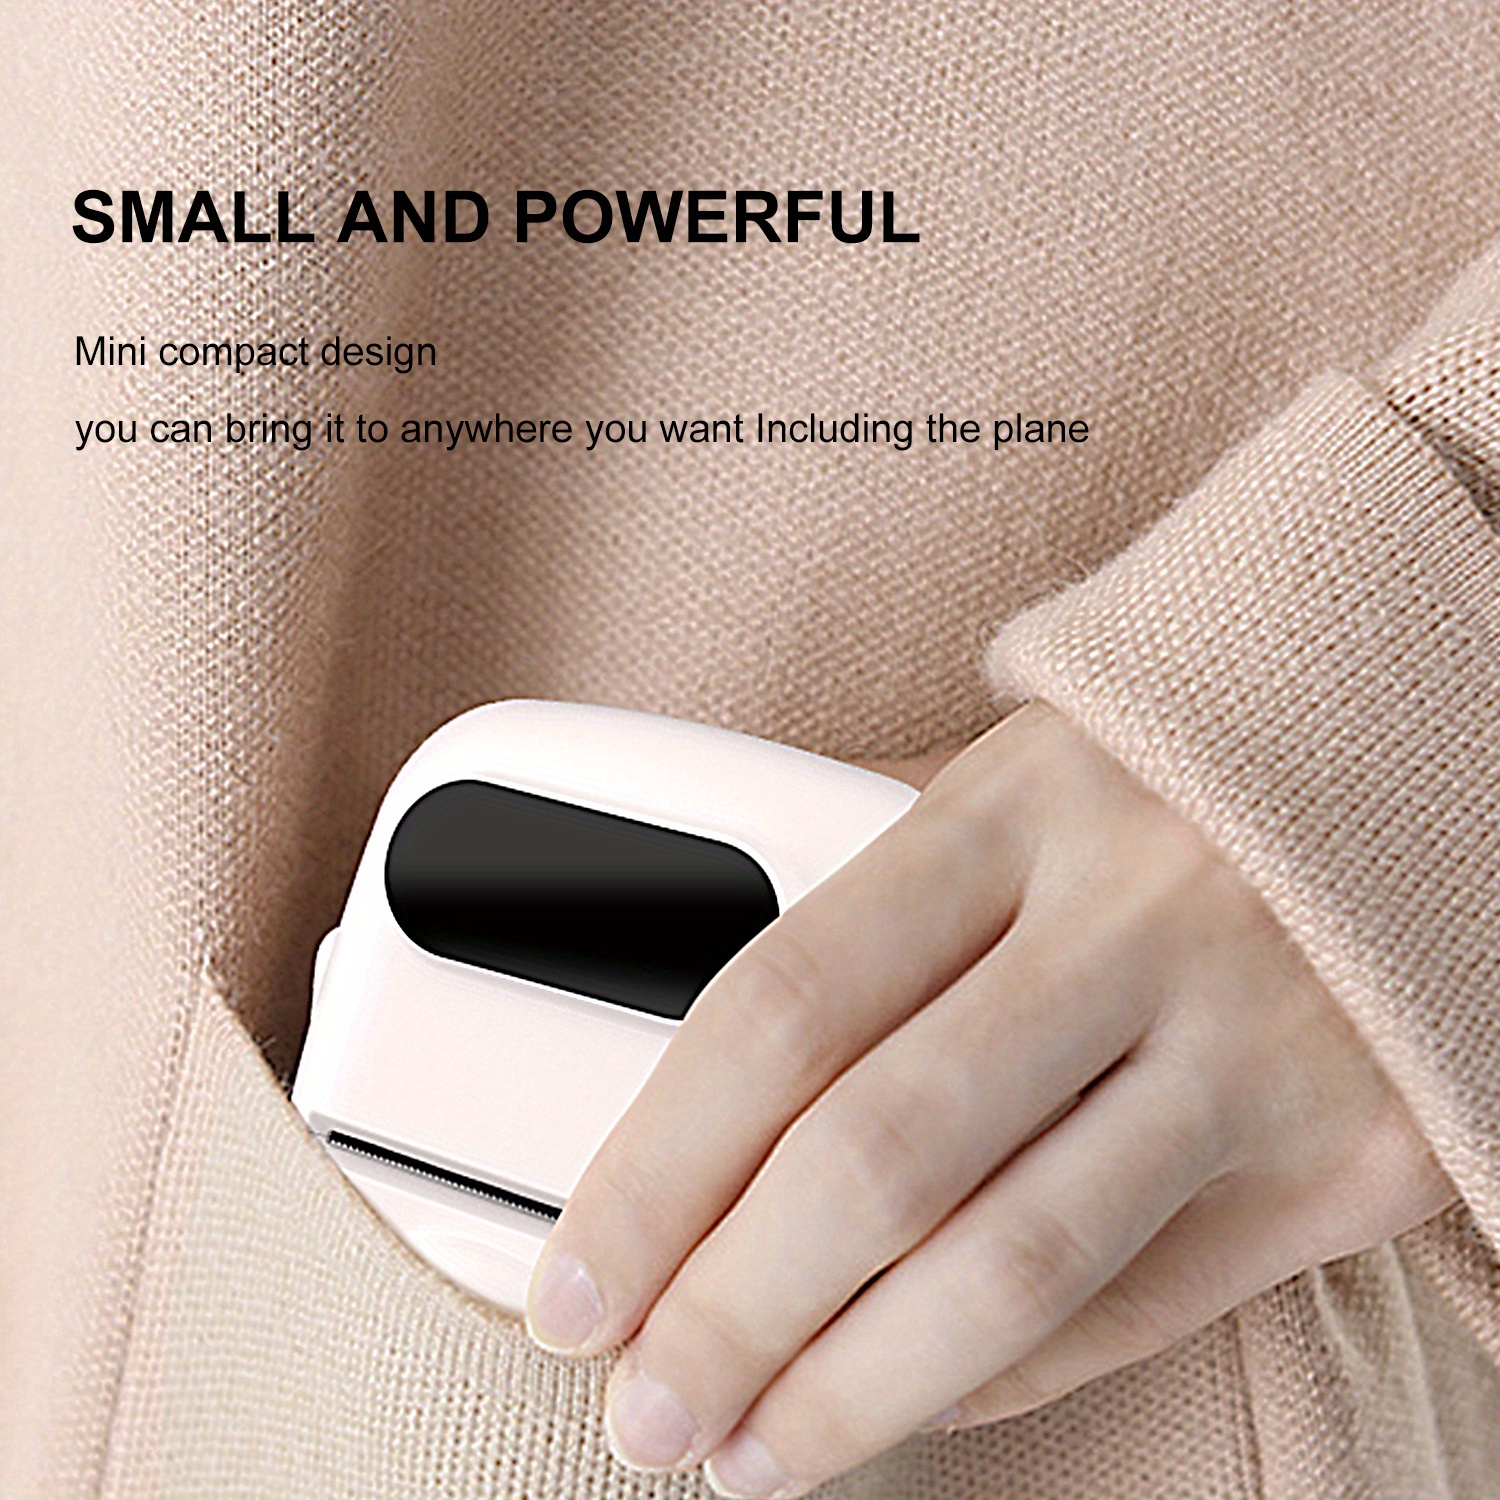 p50s thermal label makers portable bt thermal label maker printer for barcode clothing jewelry retail mailing compatible with android ios windows  with 1 roll 40 30mm label details 3